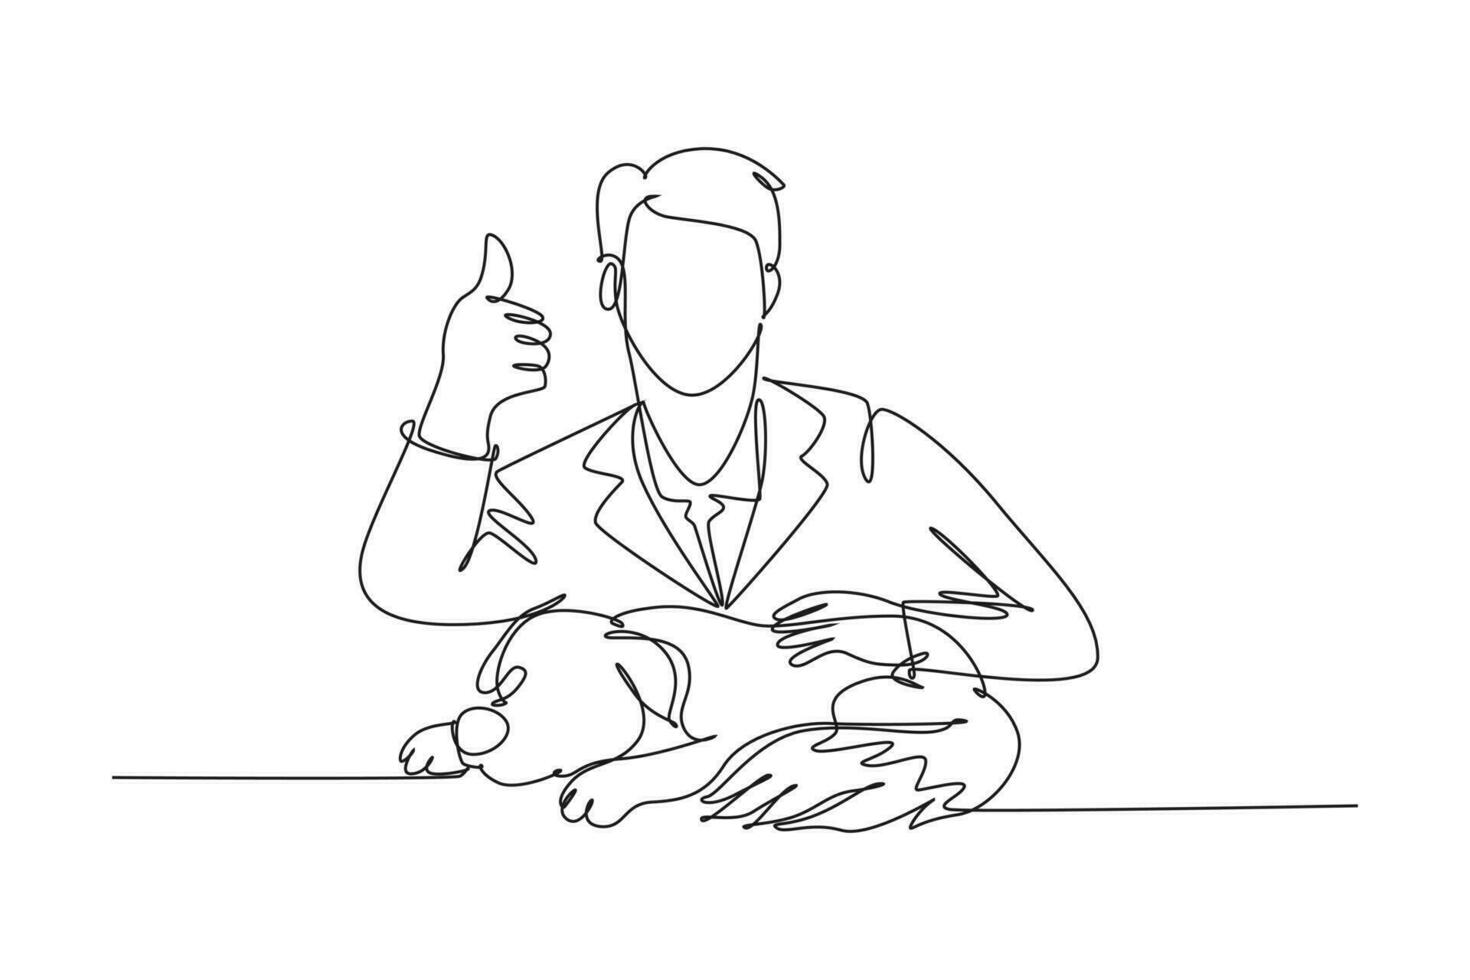 Single one line drawing young happy veterinarian doctor pose thumbs up gesture after treating sick dog at clinic. Pet healthcare concept. Modern continuous line draw design graphic vector illustration